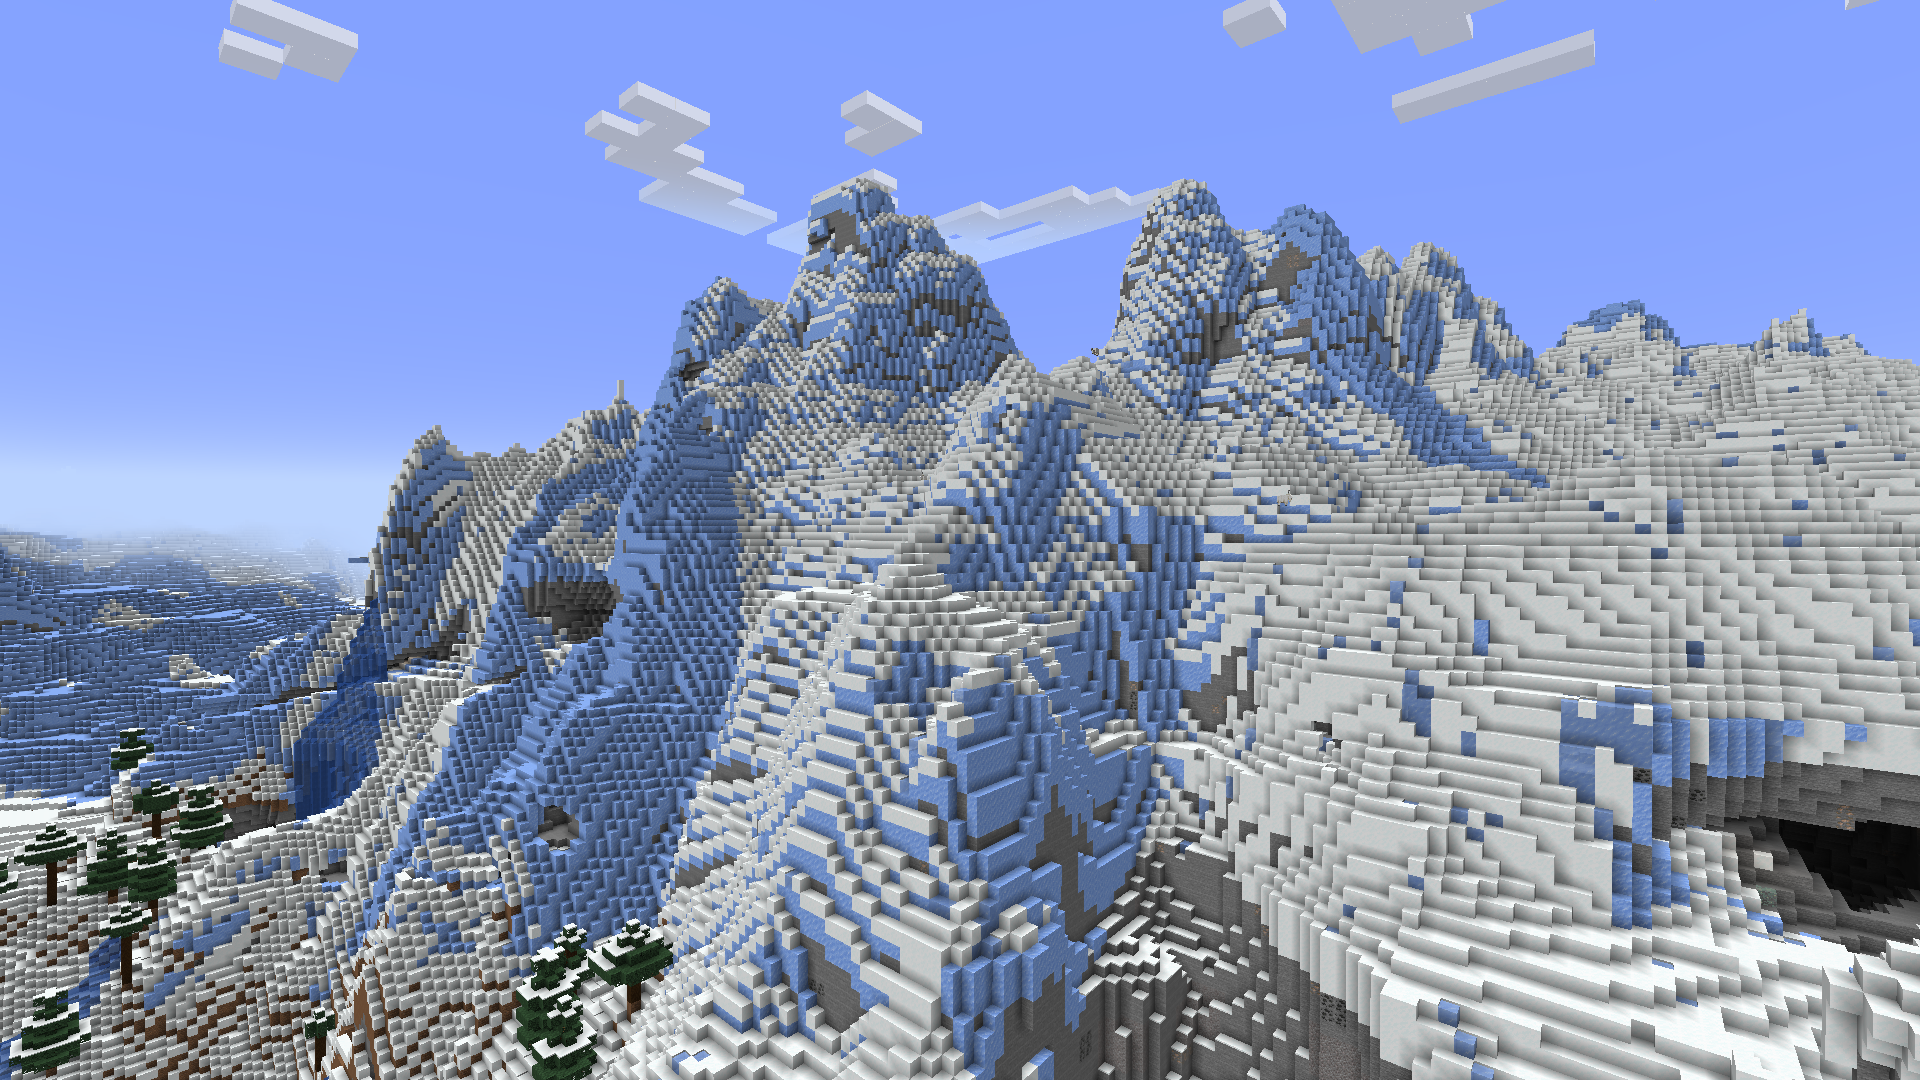 https://static.wikia.nocookie.net/minecraft_gamepedia/images/a/ab/Frozen_Peaks_1.18.png/revision/latest?cb=20220420161528